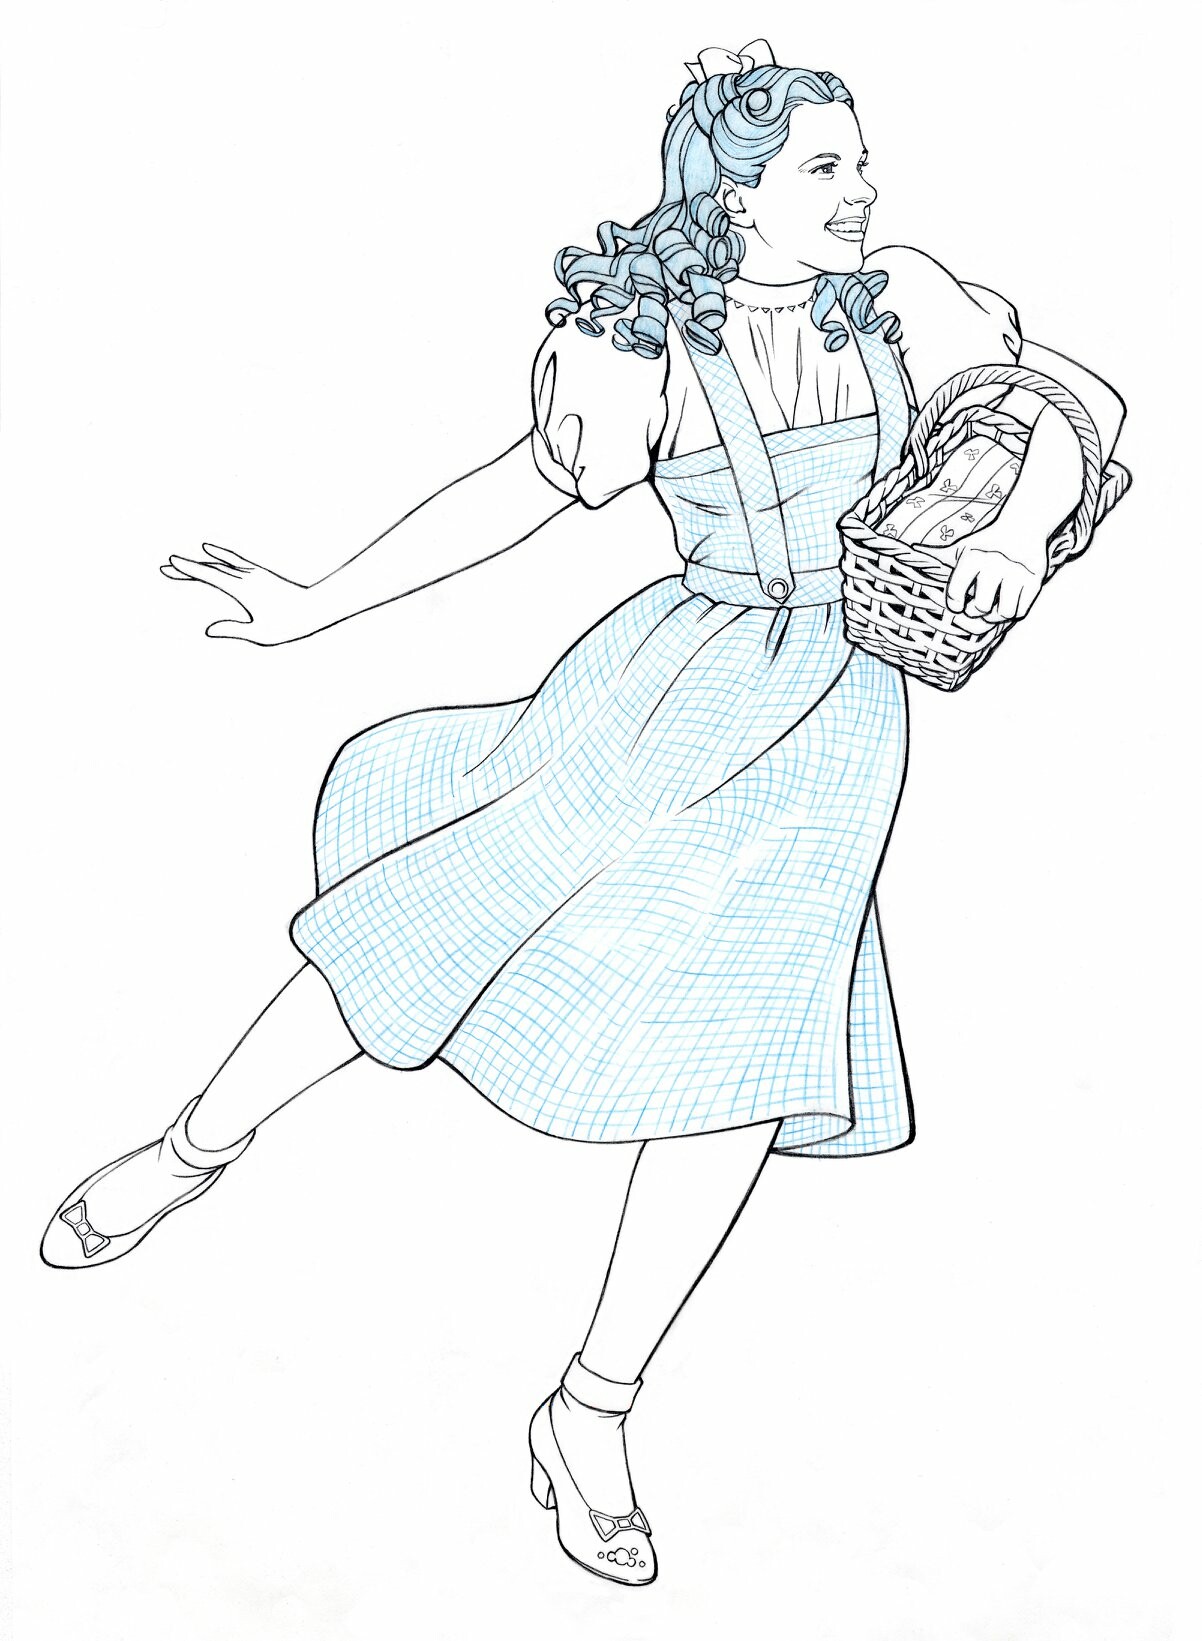 wizard of oz dorothy drawing